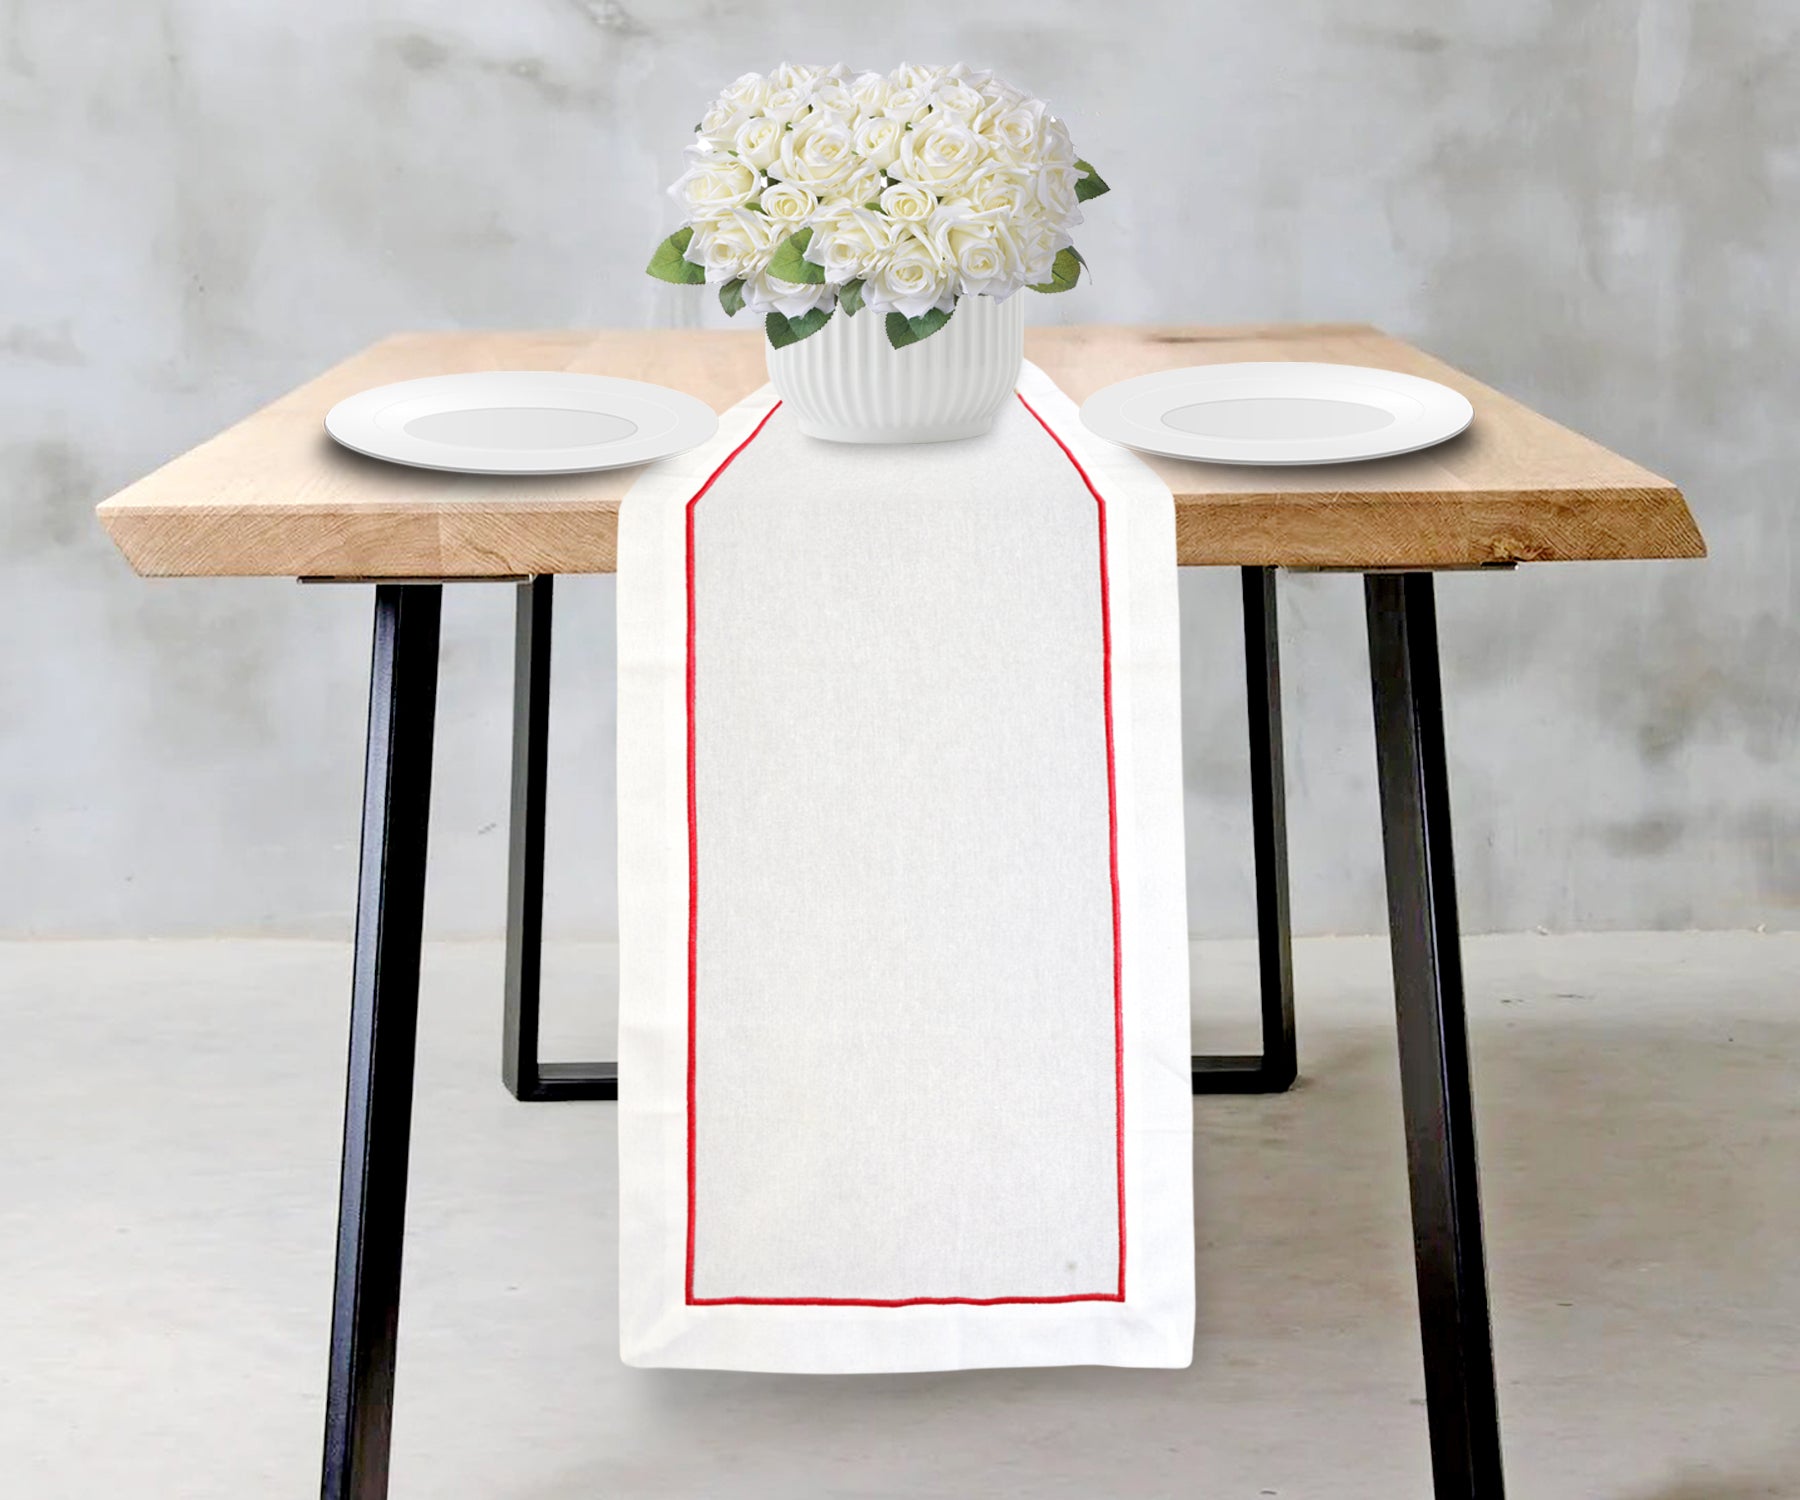 Cotton fabric table runner ideal for weddings and more.